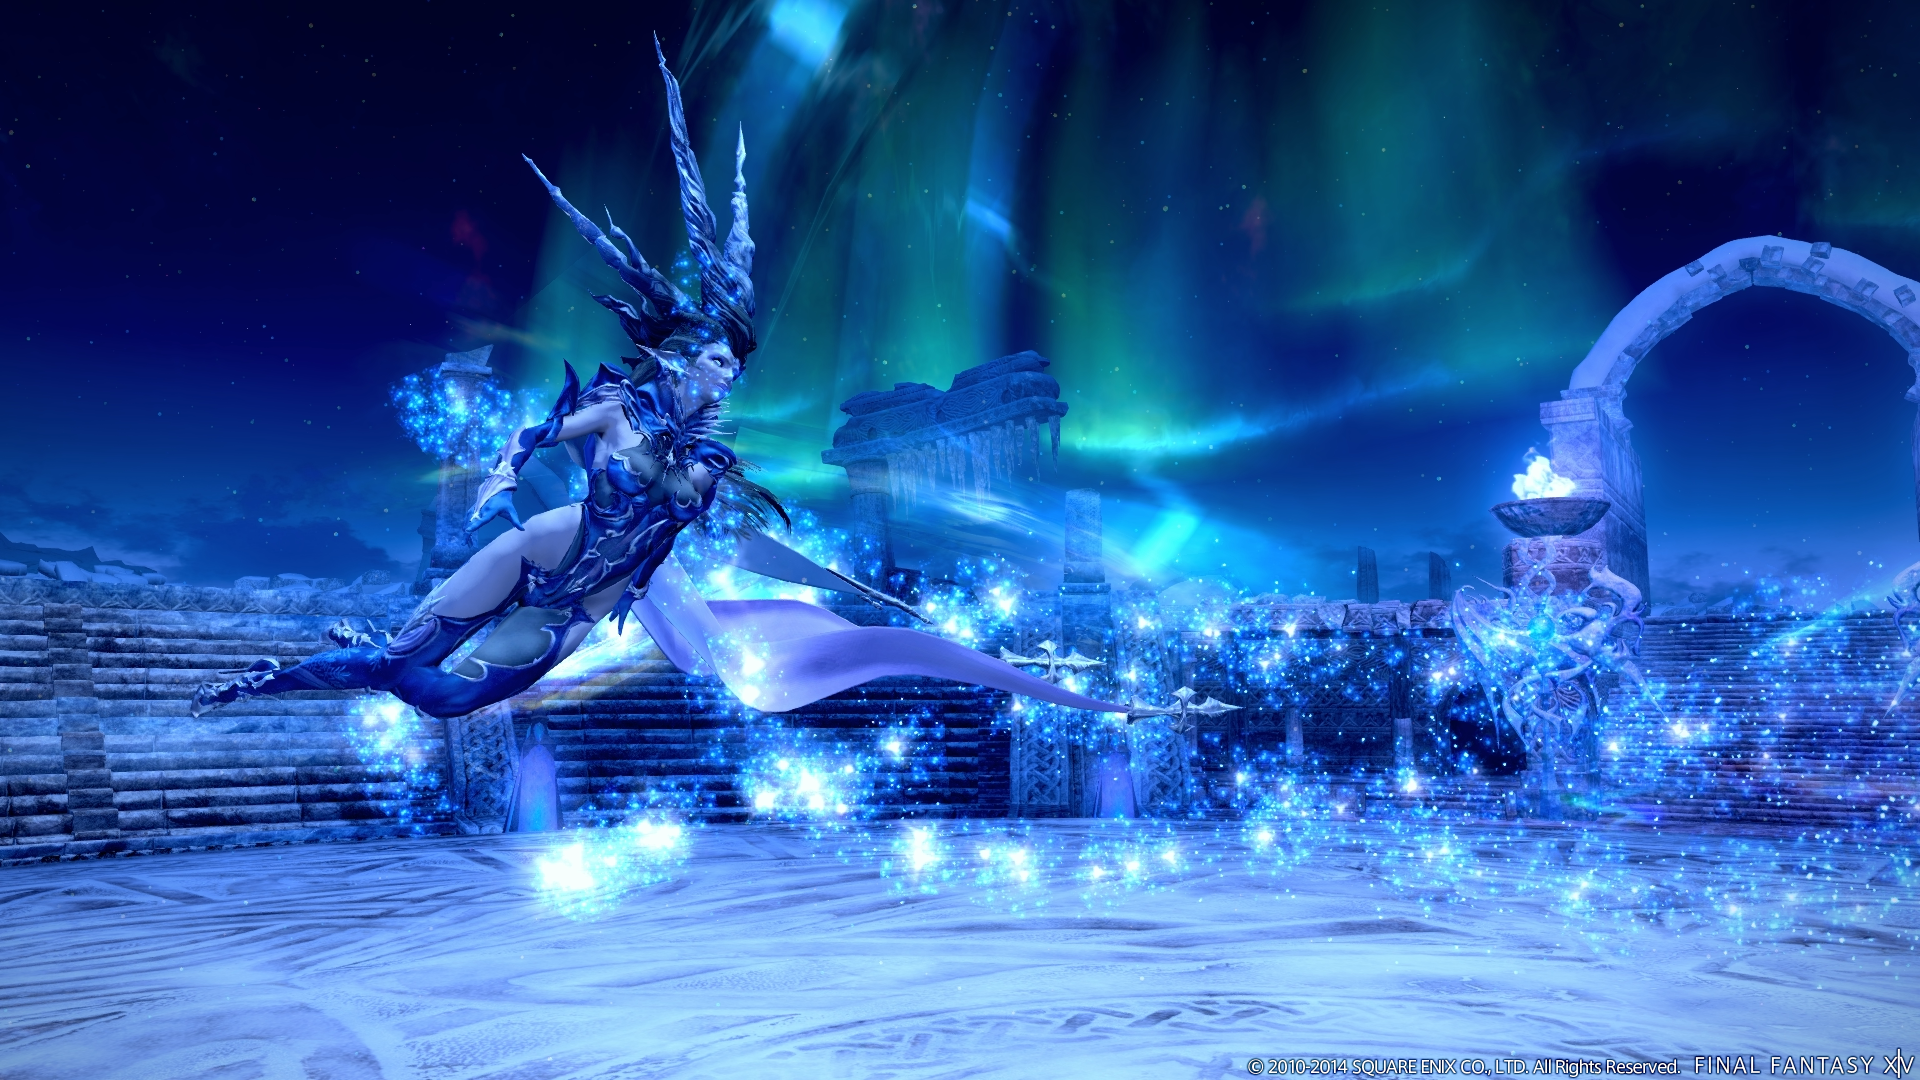 PC FINAL FANTASY XIV’s Dreams of Ice Out Now.